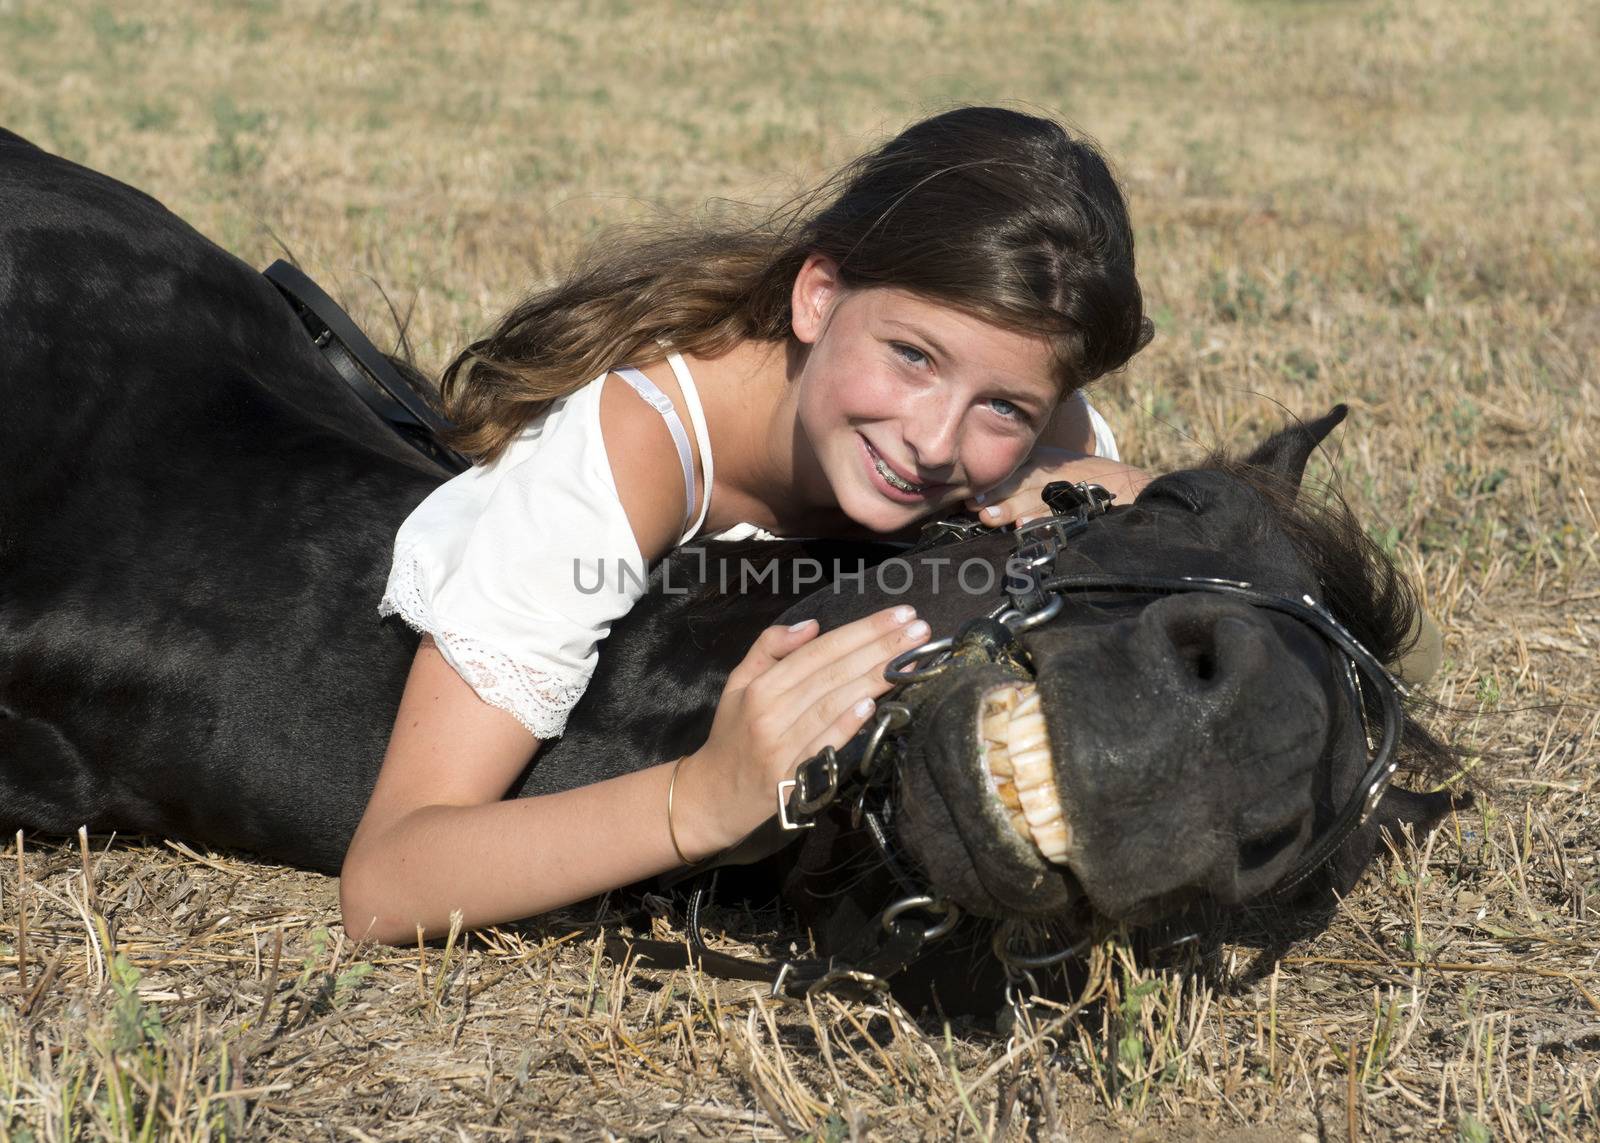 young girl riding a black stallion in a field